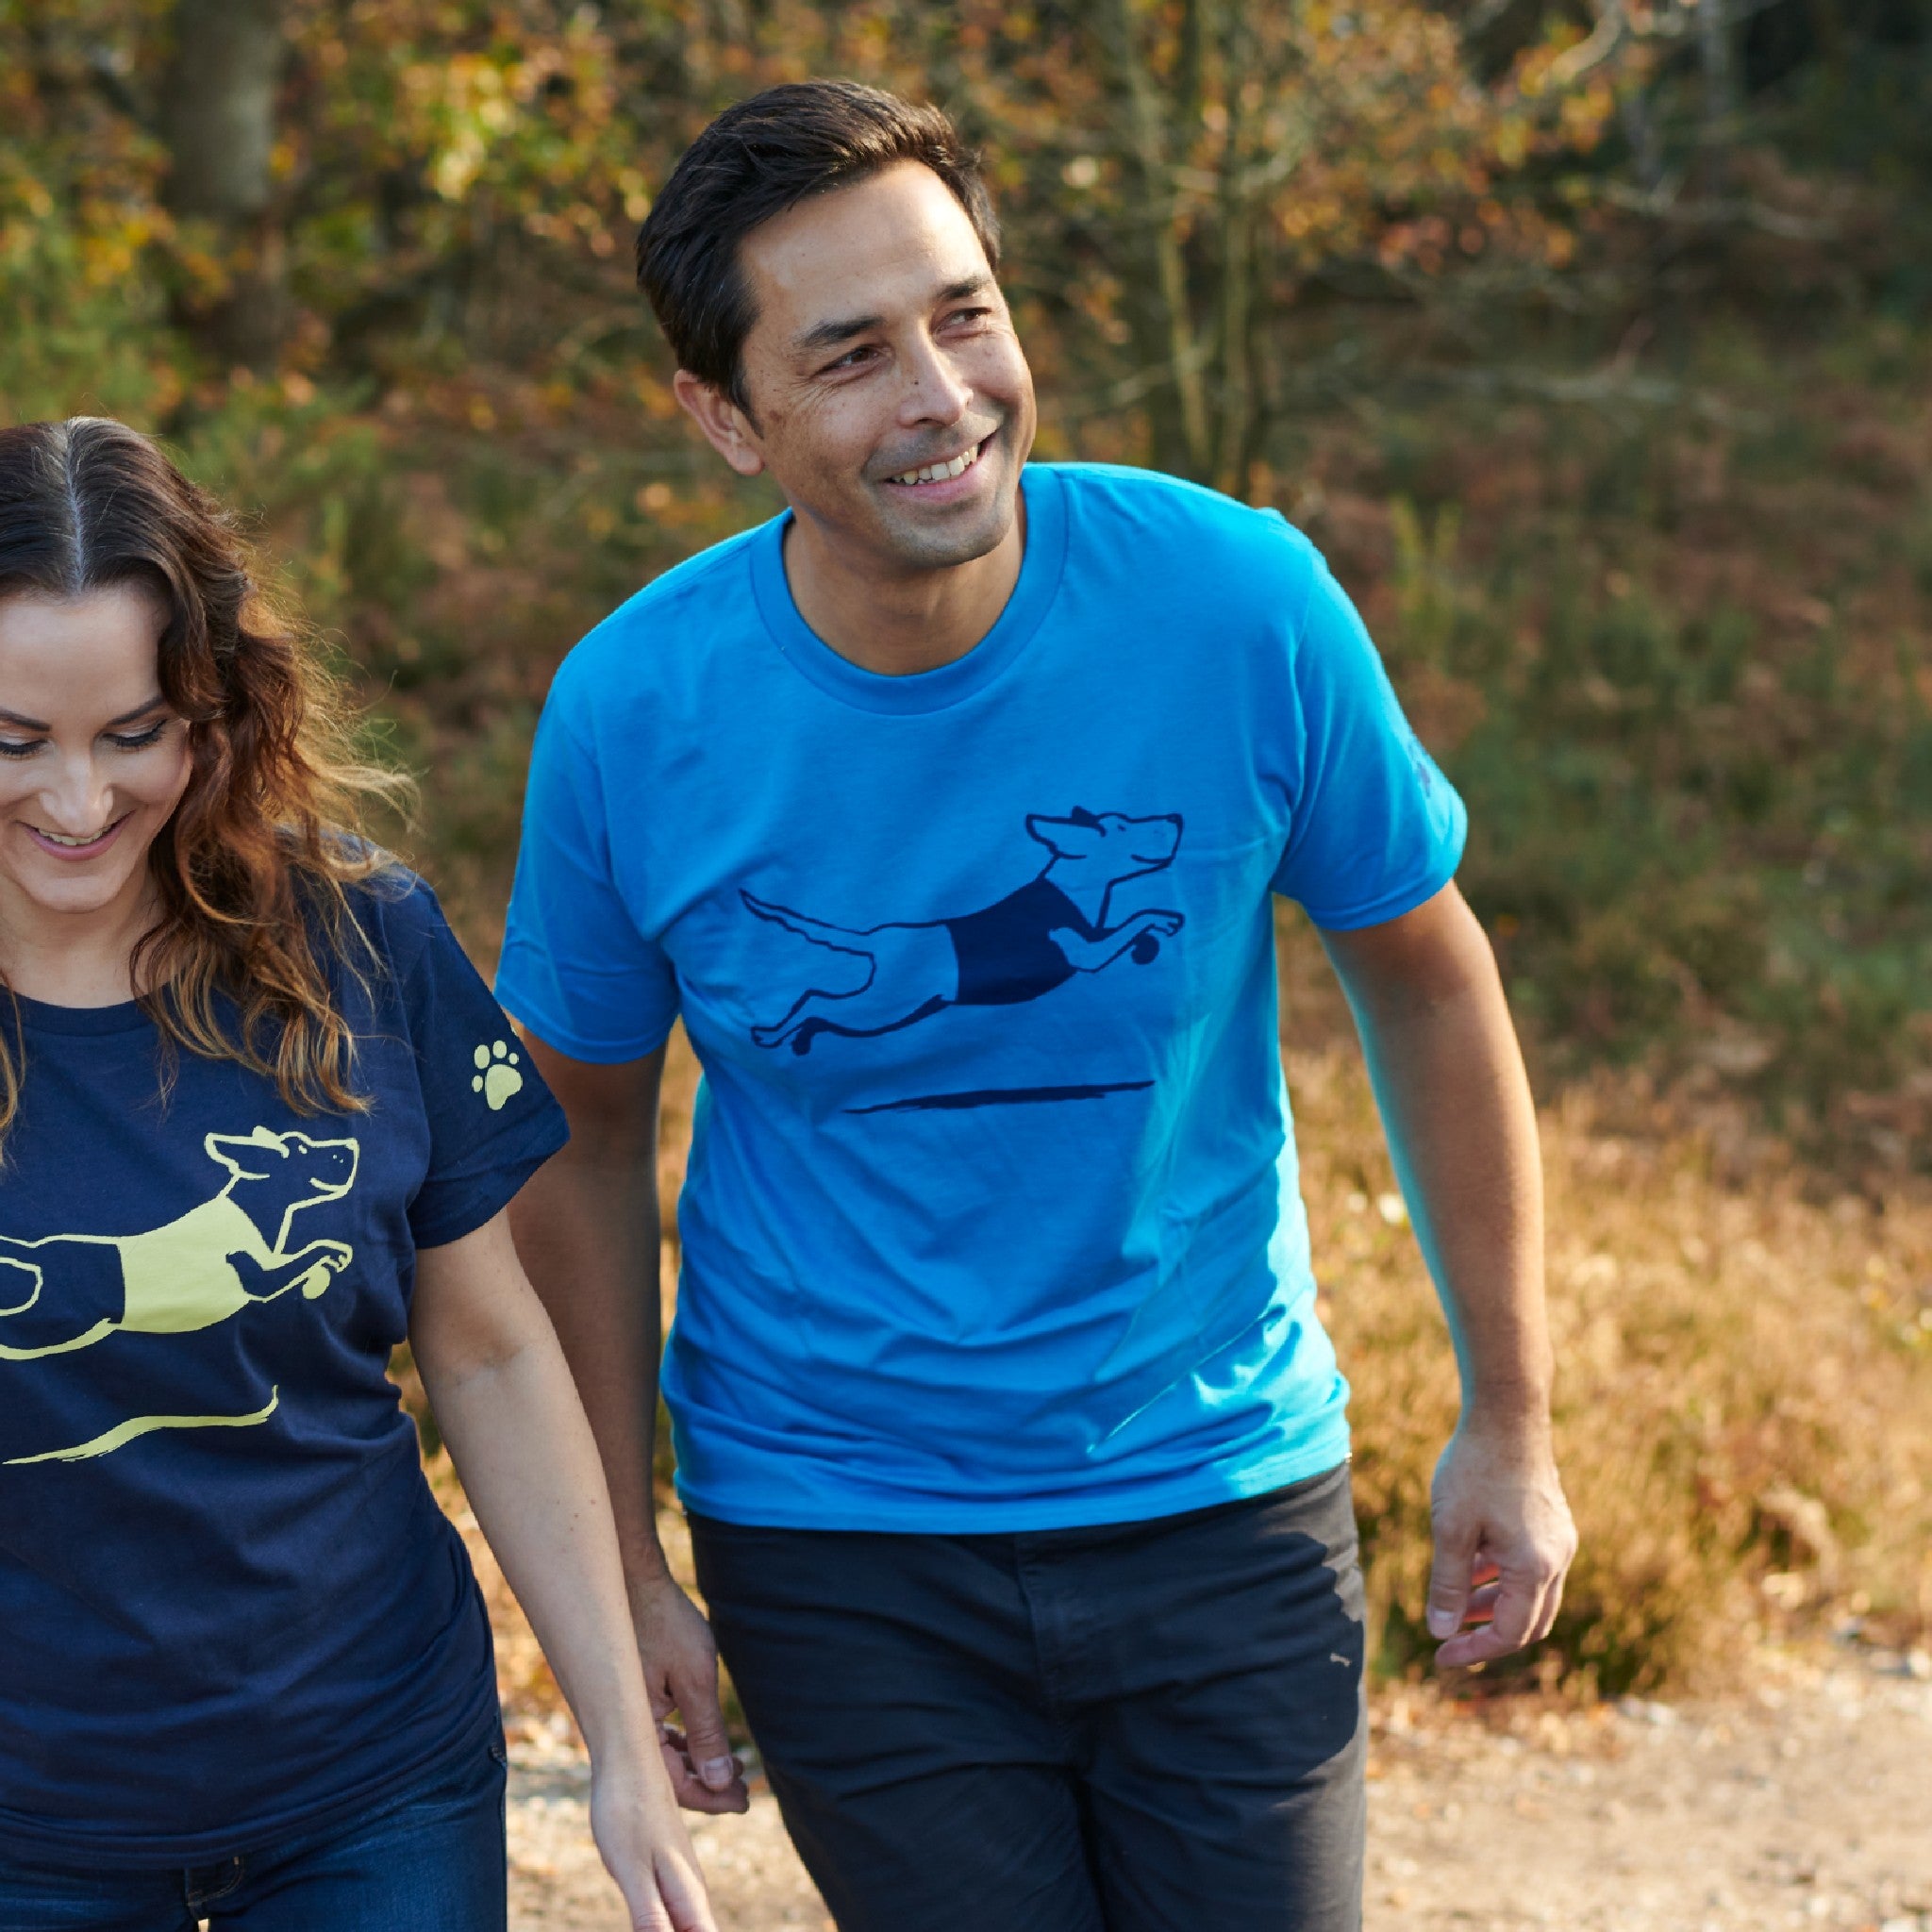 A man is outside wearing a light blue tshirt with a dark blue leaping dog design on the front. He is with a woman who is wearing a matching tshirt in navy and yellow.